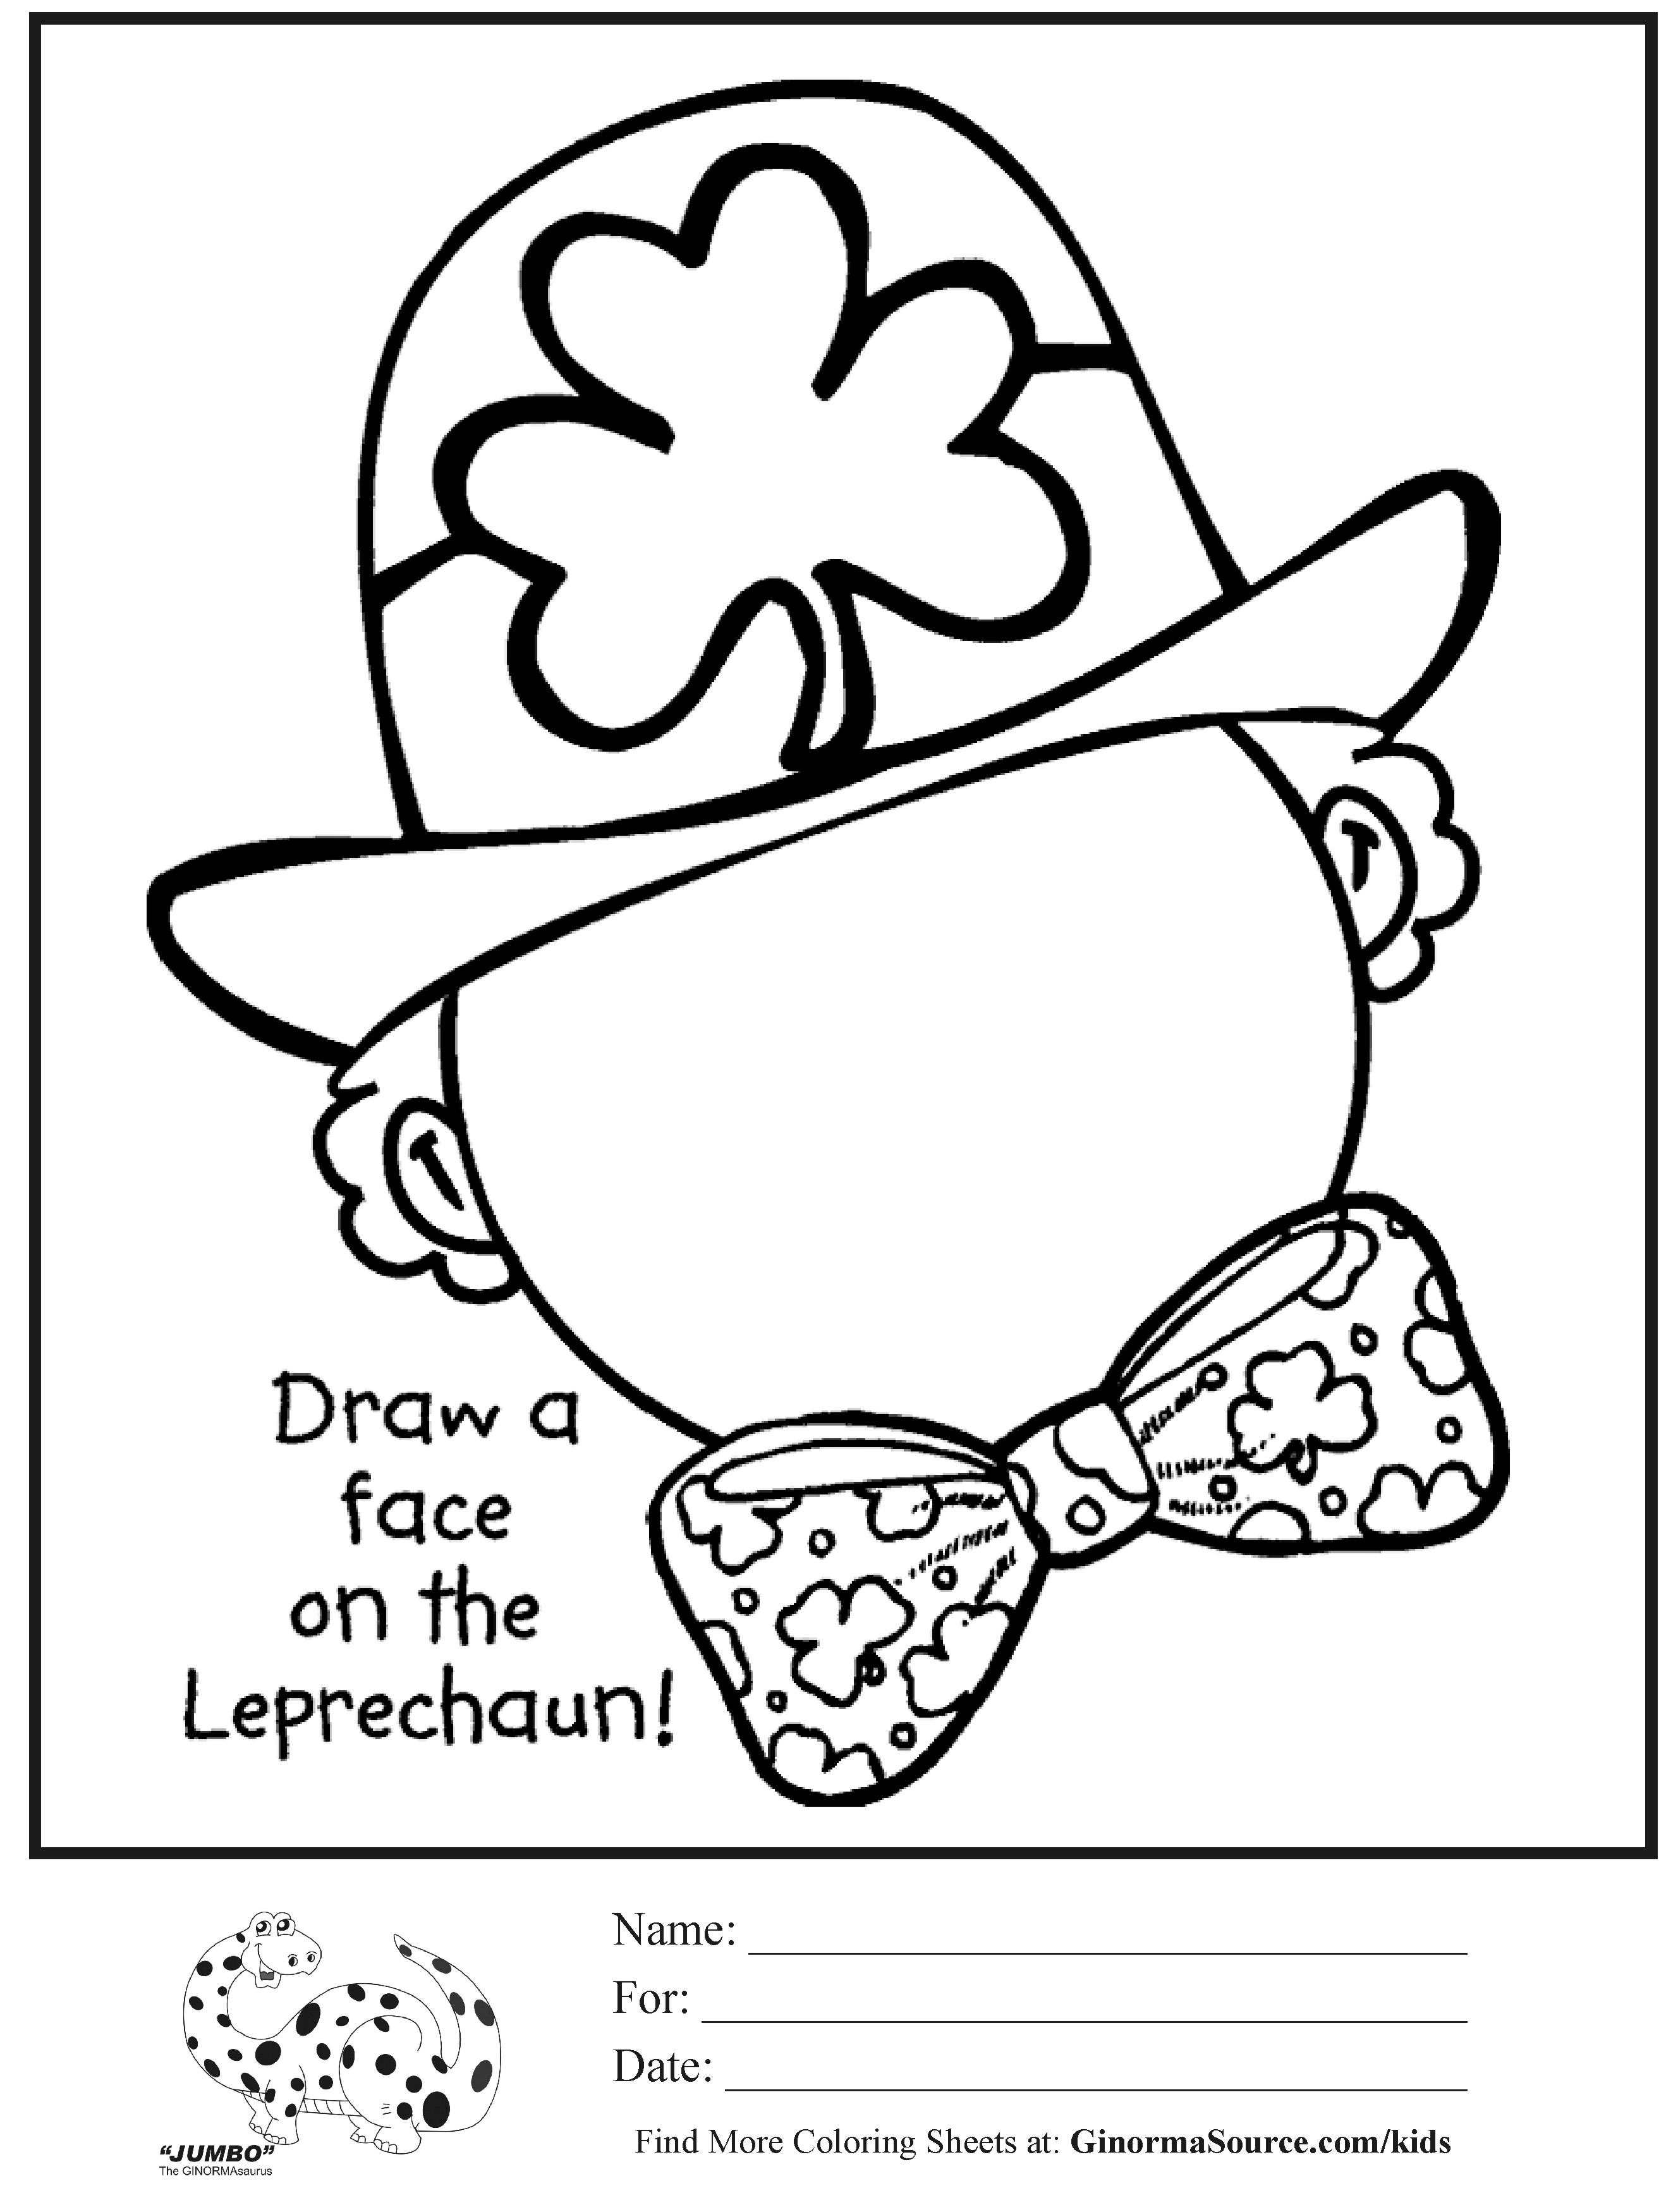 St Patrick Day Coloring Pages Disney at Free